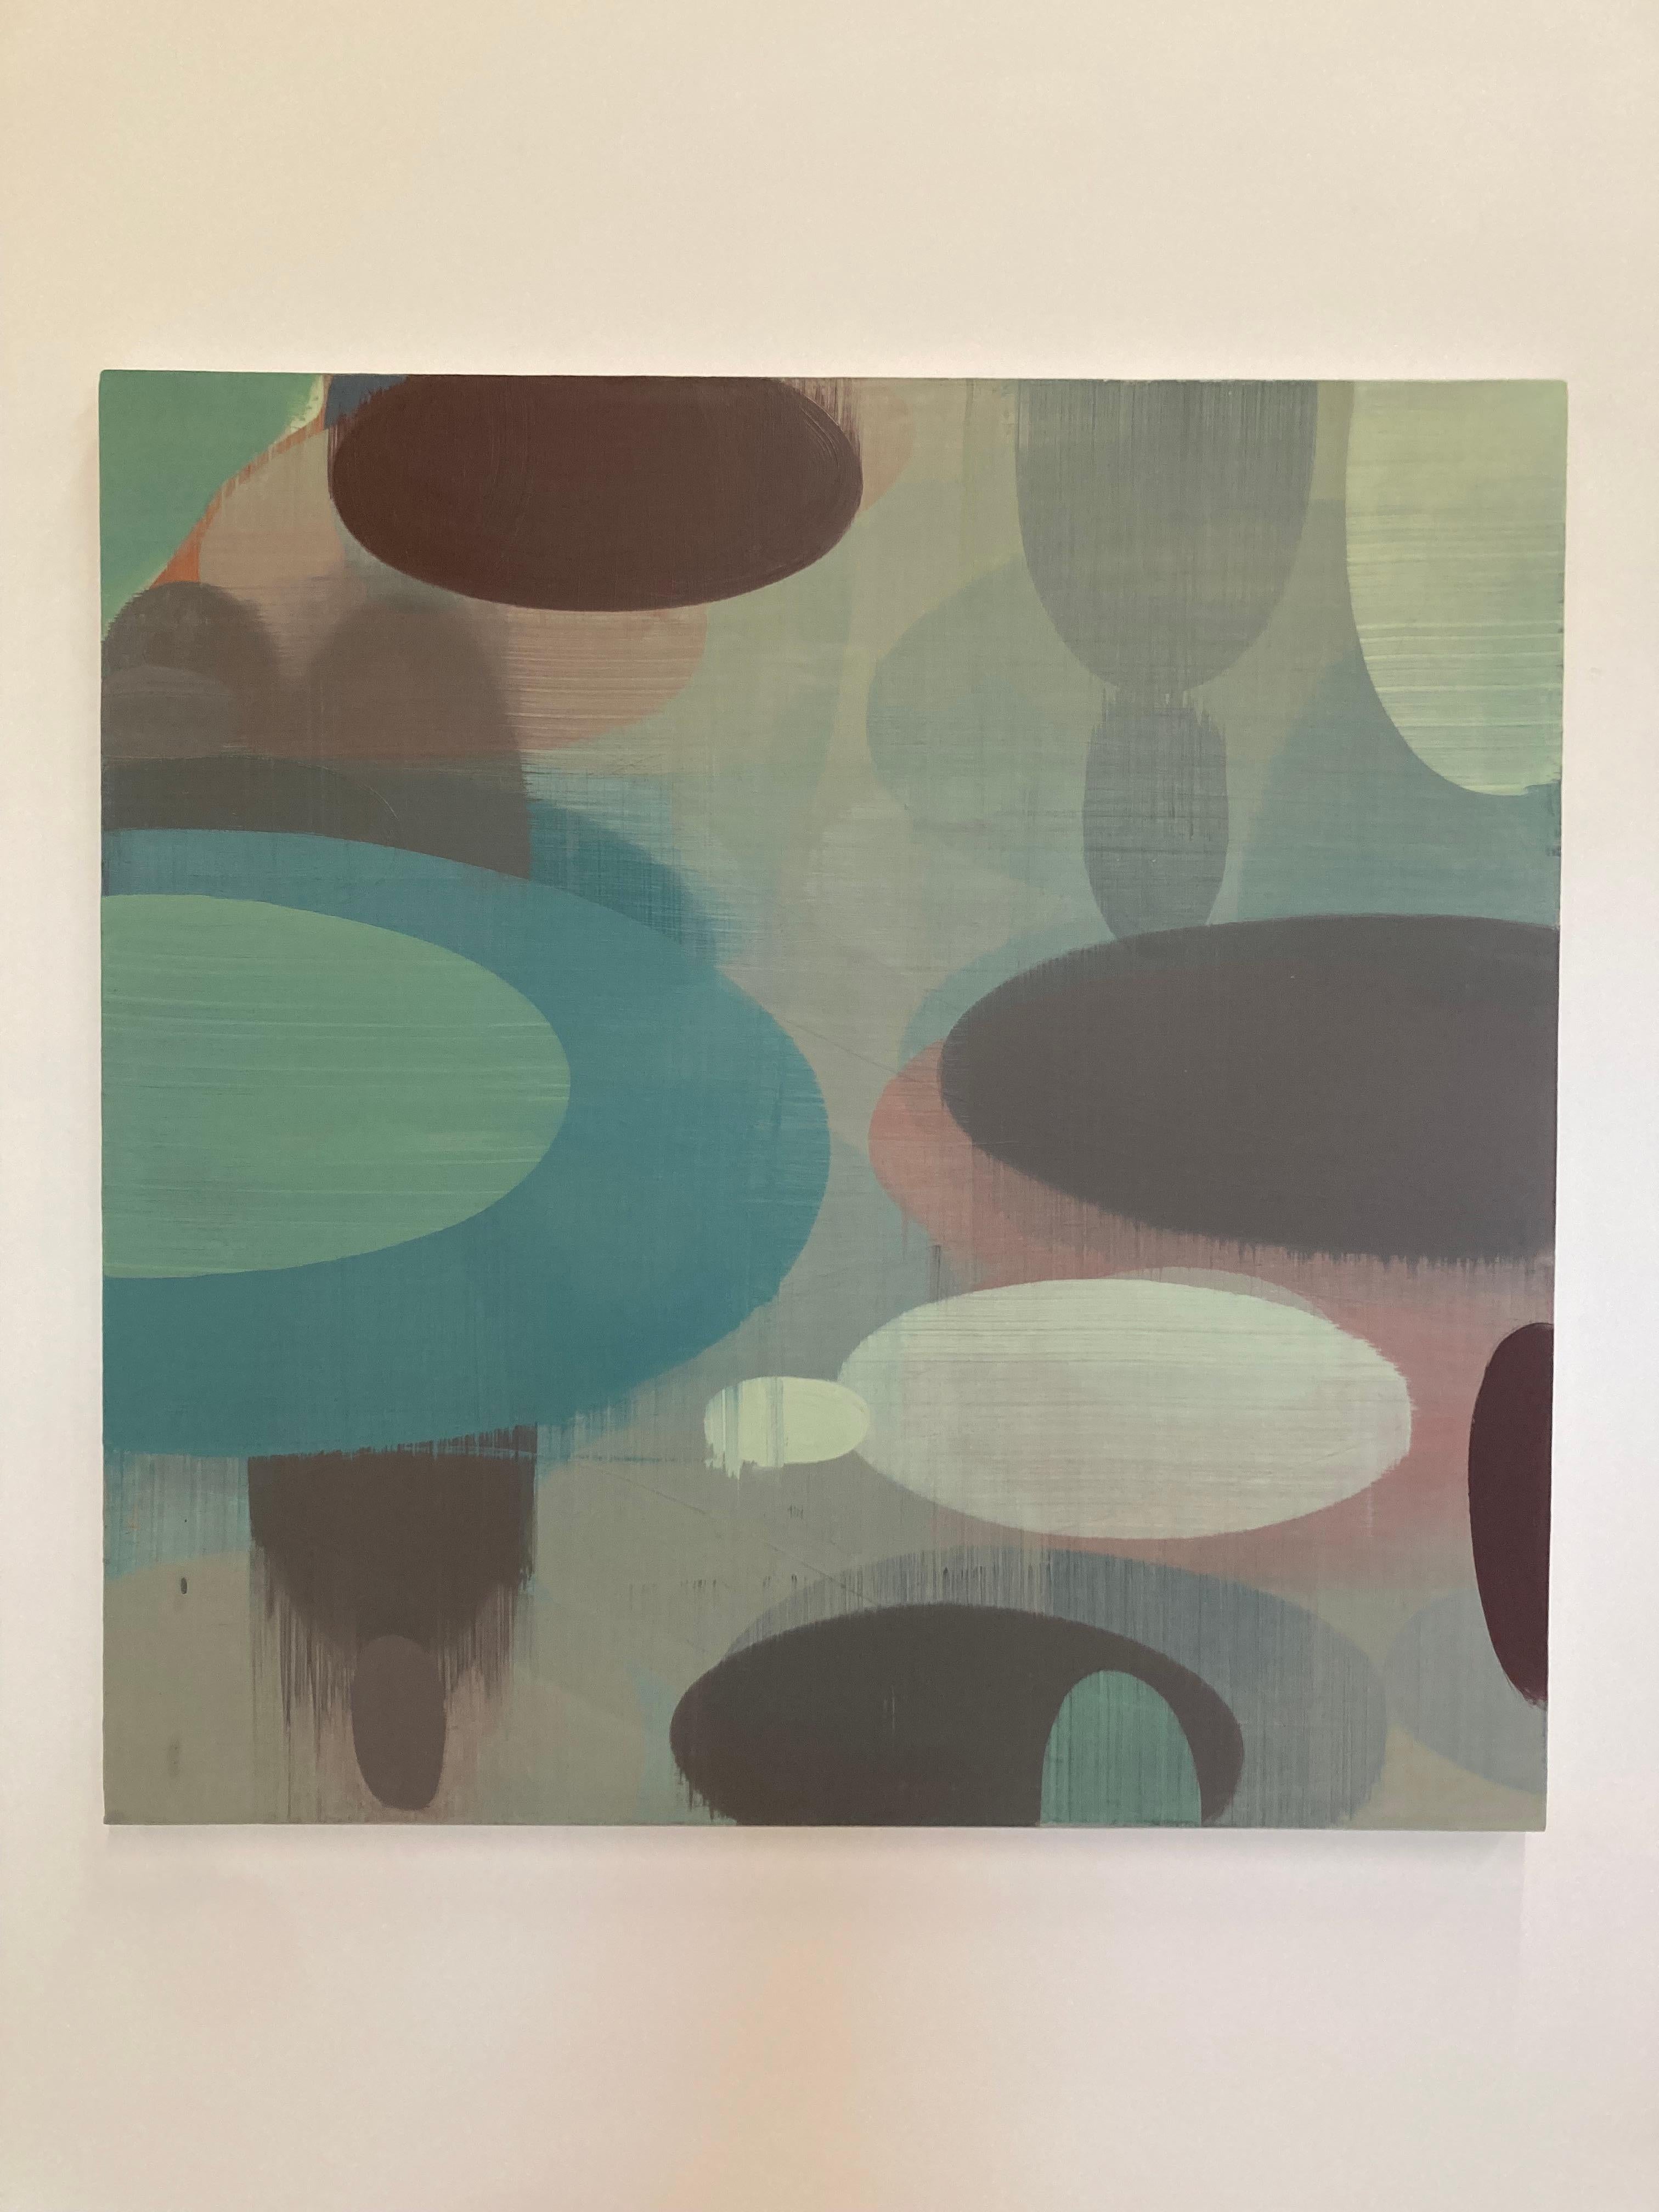 Trek, Blue, Mint Green, Light Teal, Mauve, Eggplant Layered Ovals, Circles - Painting by Margaret Neill